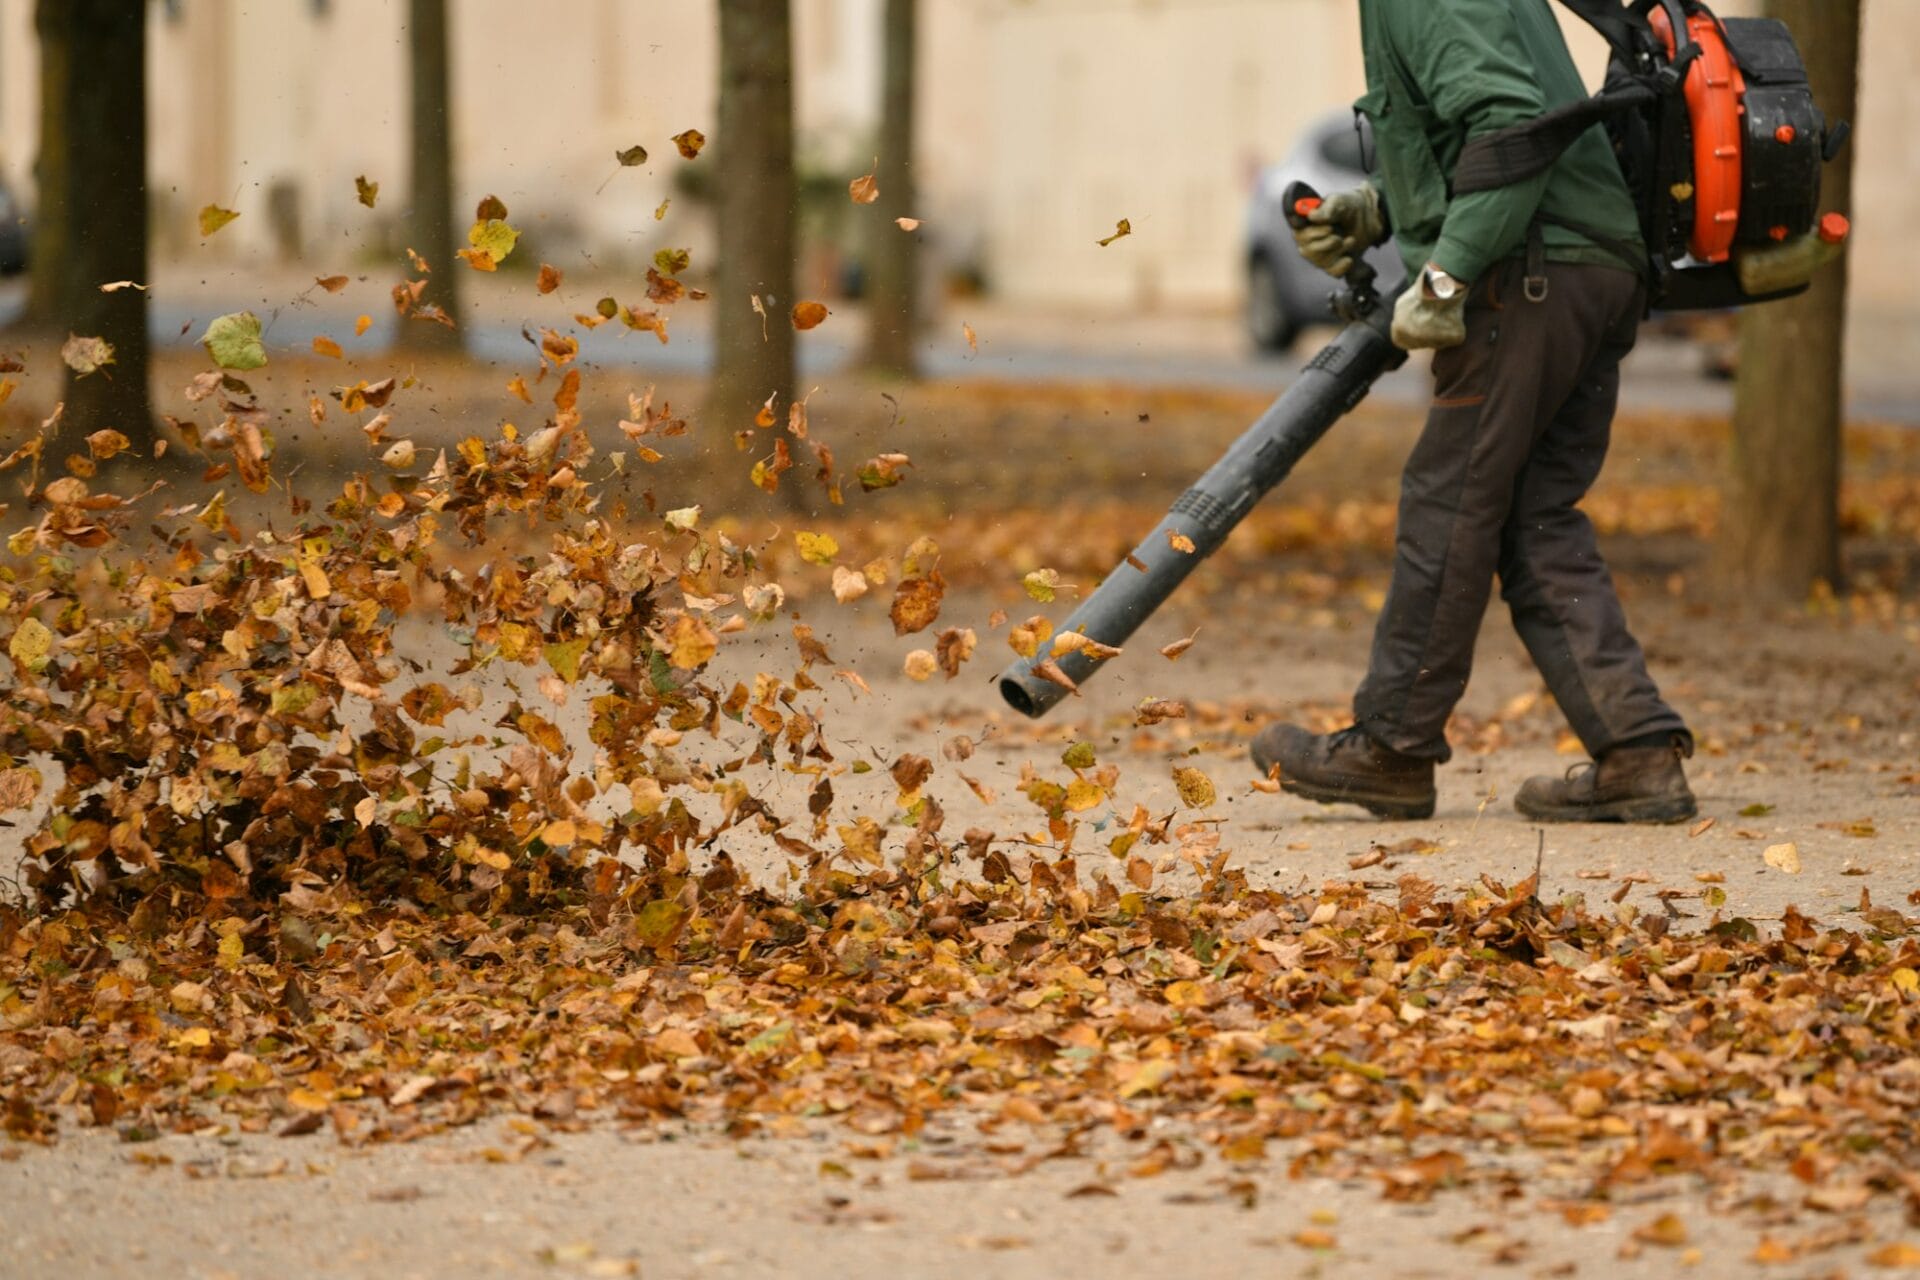 A man cleaning the park with a leaf blower